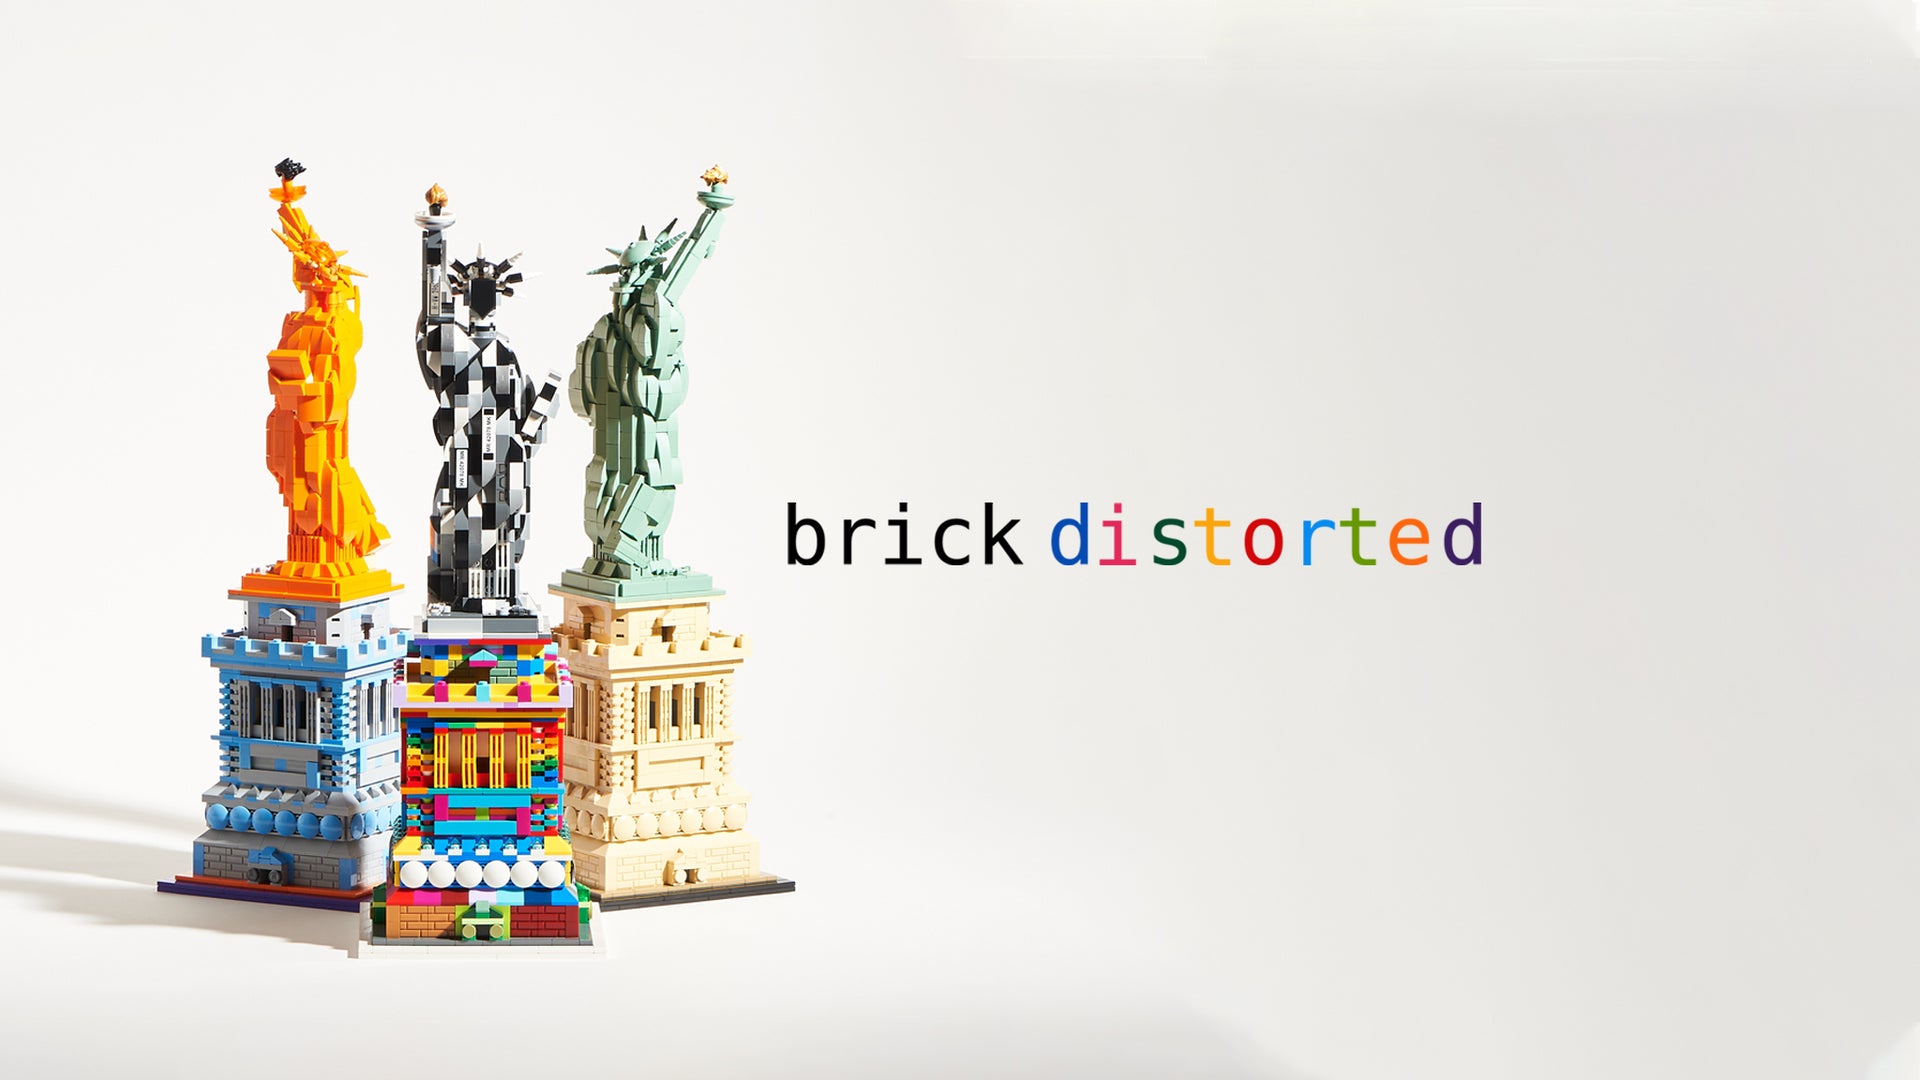 Load video: Short music video featuring highlights of brickdistorted builds